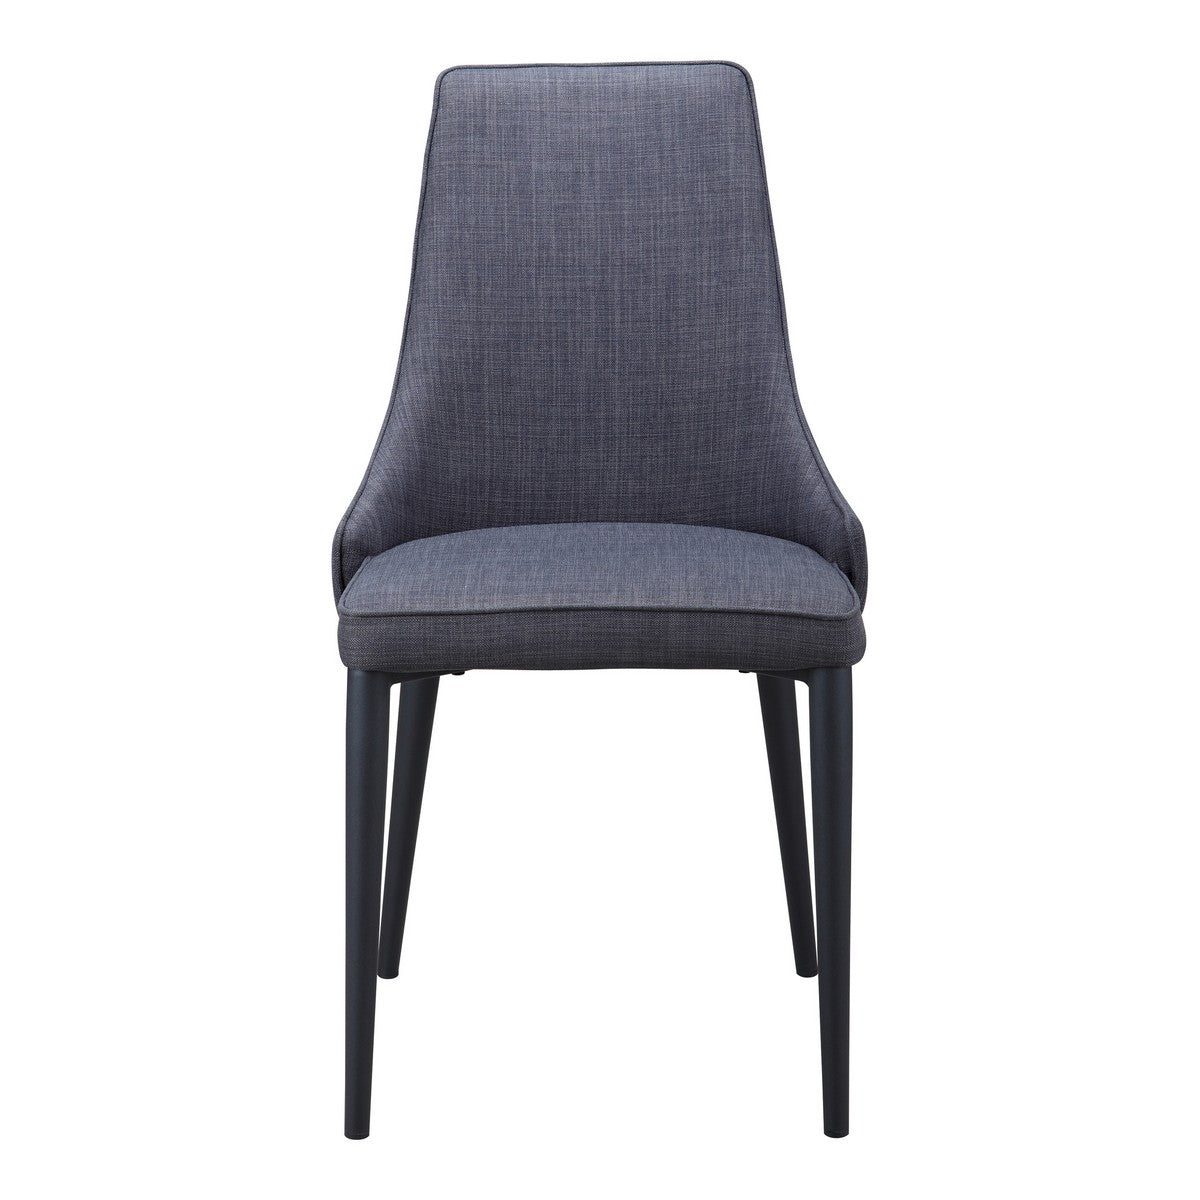 Moe's Home Collection Hazel Dining Chair Dark Grey-Set of Two - HK-1003-25 - Moe's Home Collection - Dining Chairs - Minimal And Modern - 1